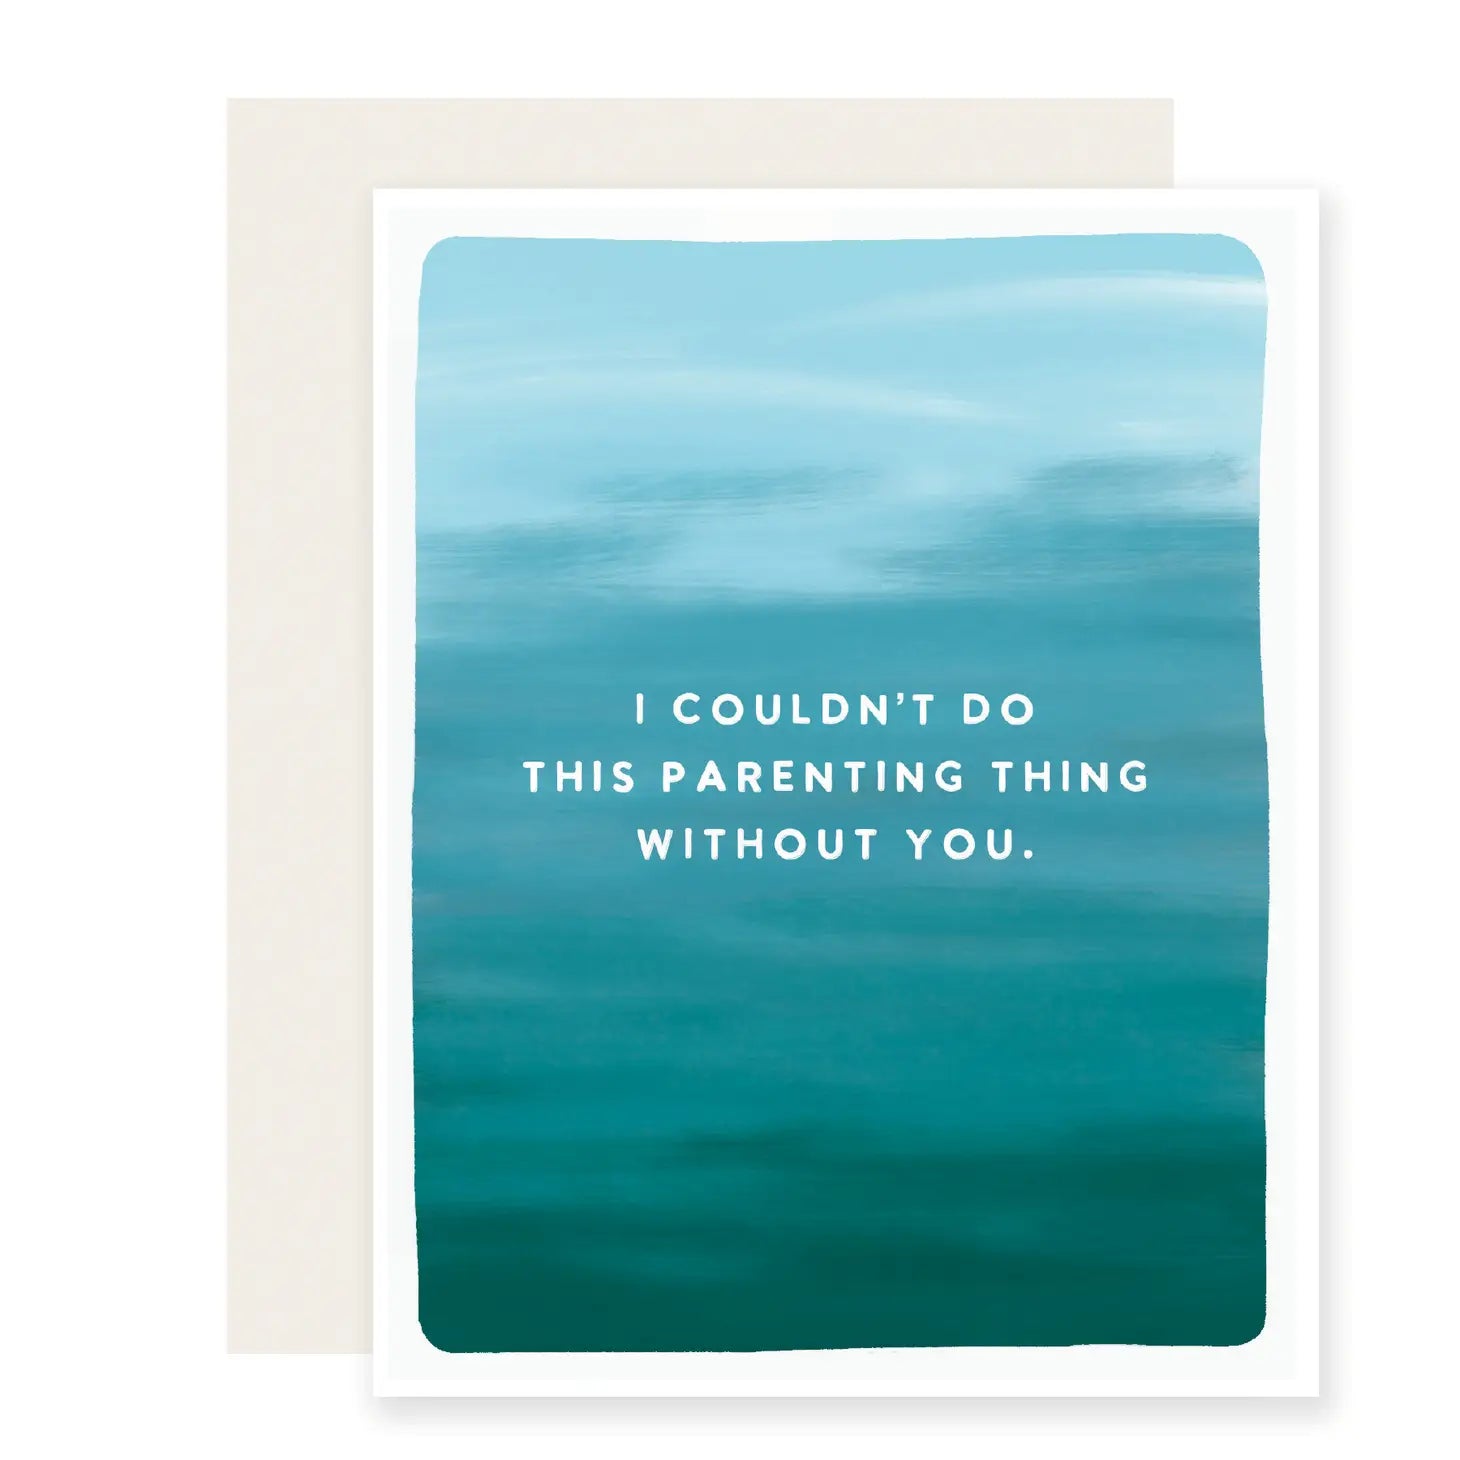 White card with blue gradient background. White text reads "I couldn't do this parenting thing without you"